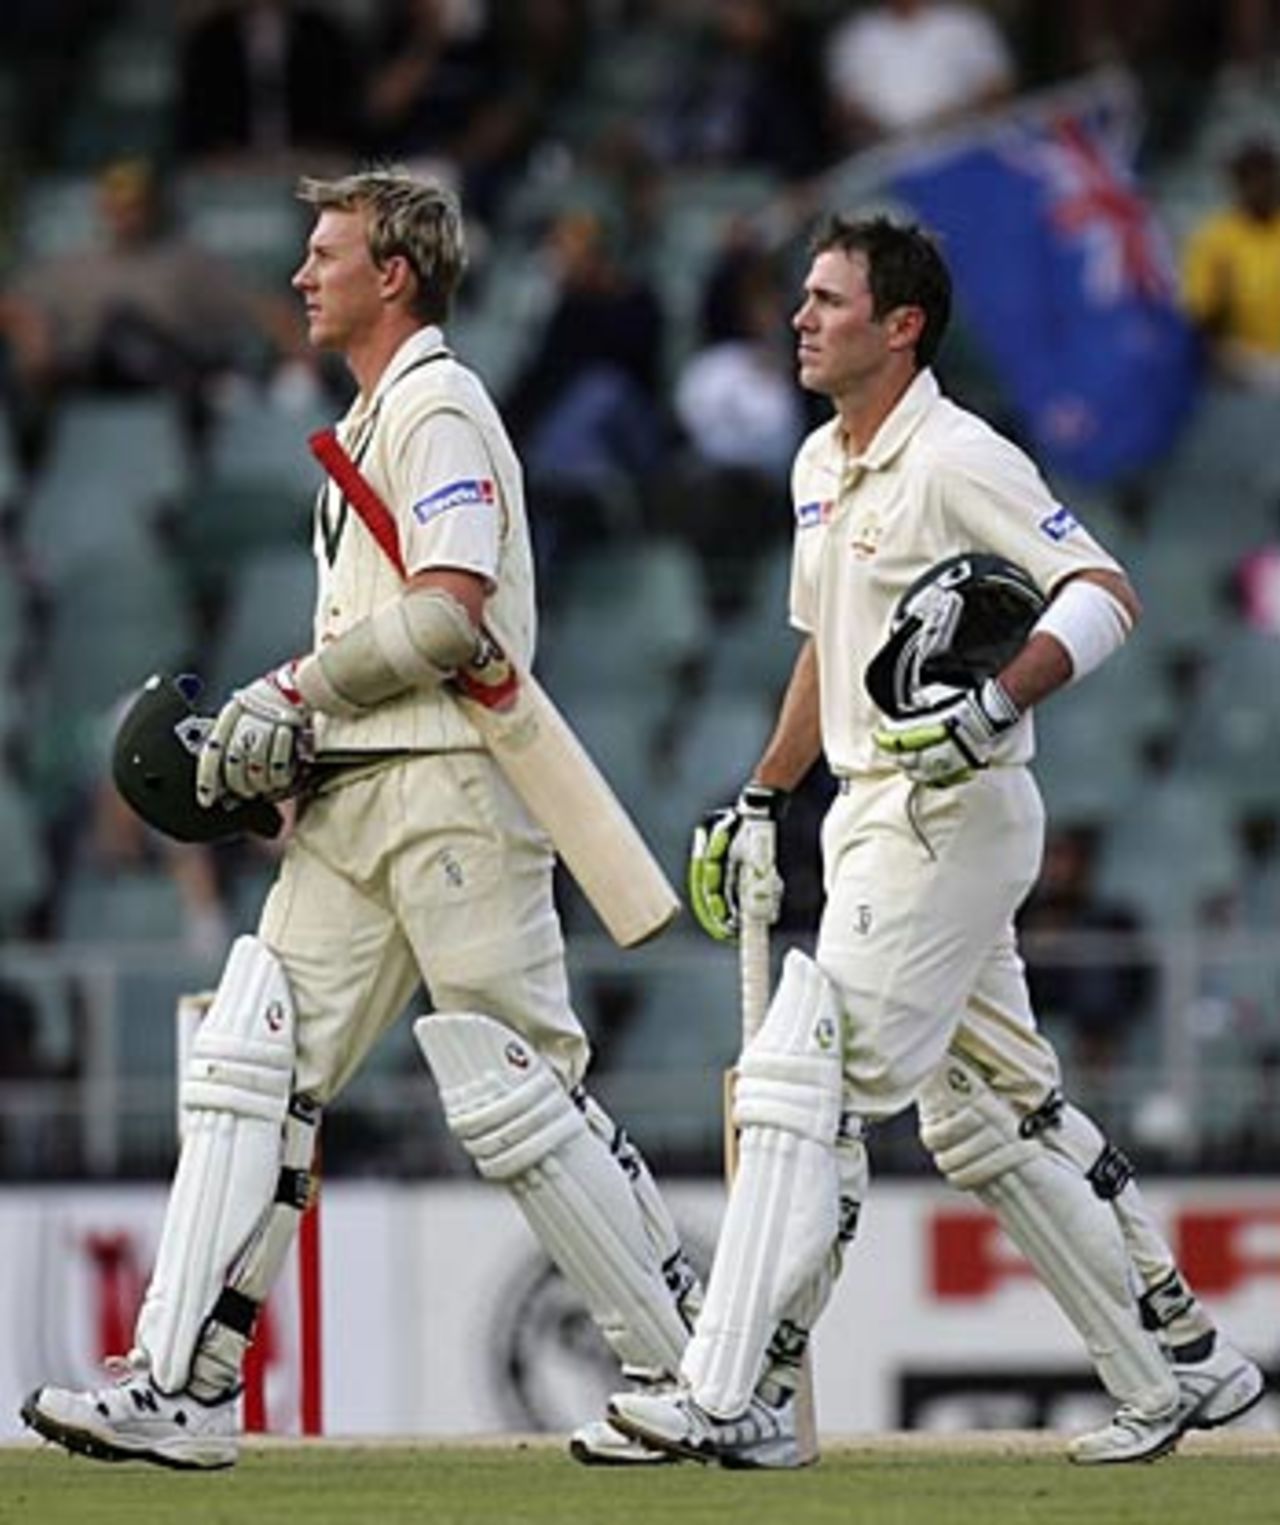 Brett Lee and Damien Martyn head for the dressing room as bad light ends play with them 44 runs short and four wickets left, South Africa v Australia, 3rd Test, Johannesburg, April 3, 2006